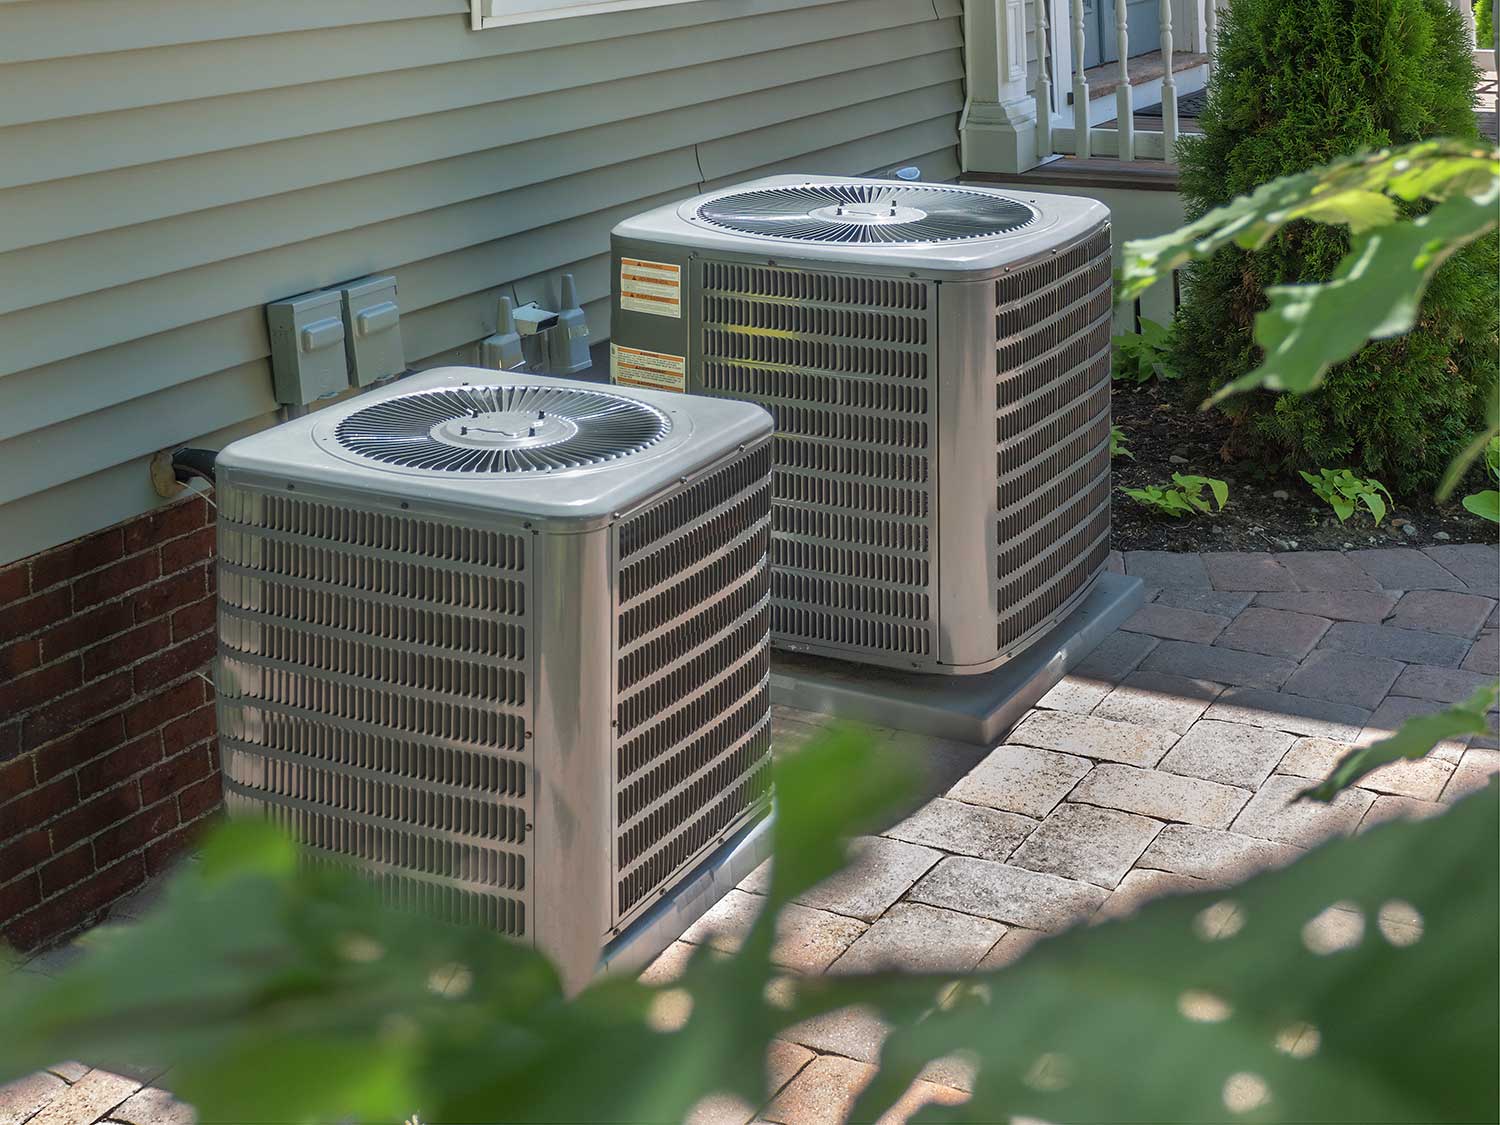 Preserving your cooling system and heating system